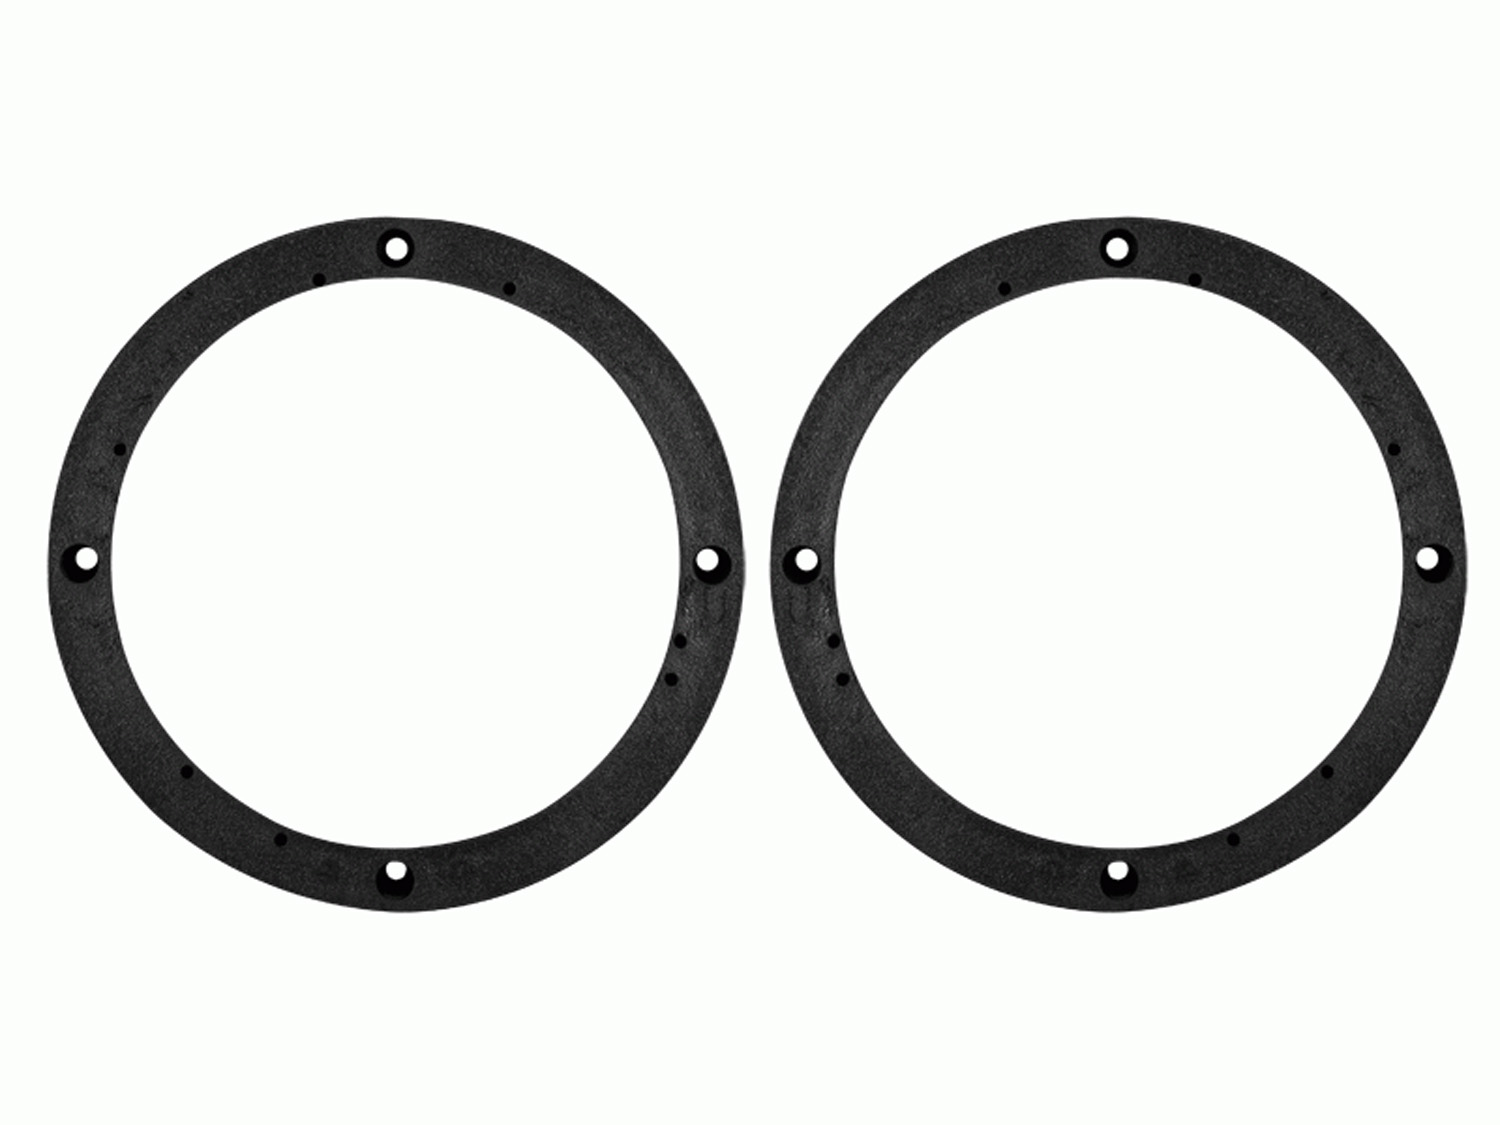 Metra Adapt 1In Spacer Ring Plstc-Fits Most 5.25In6In 6.5In